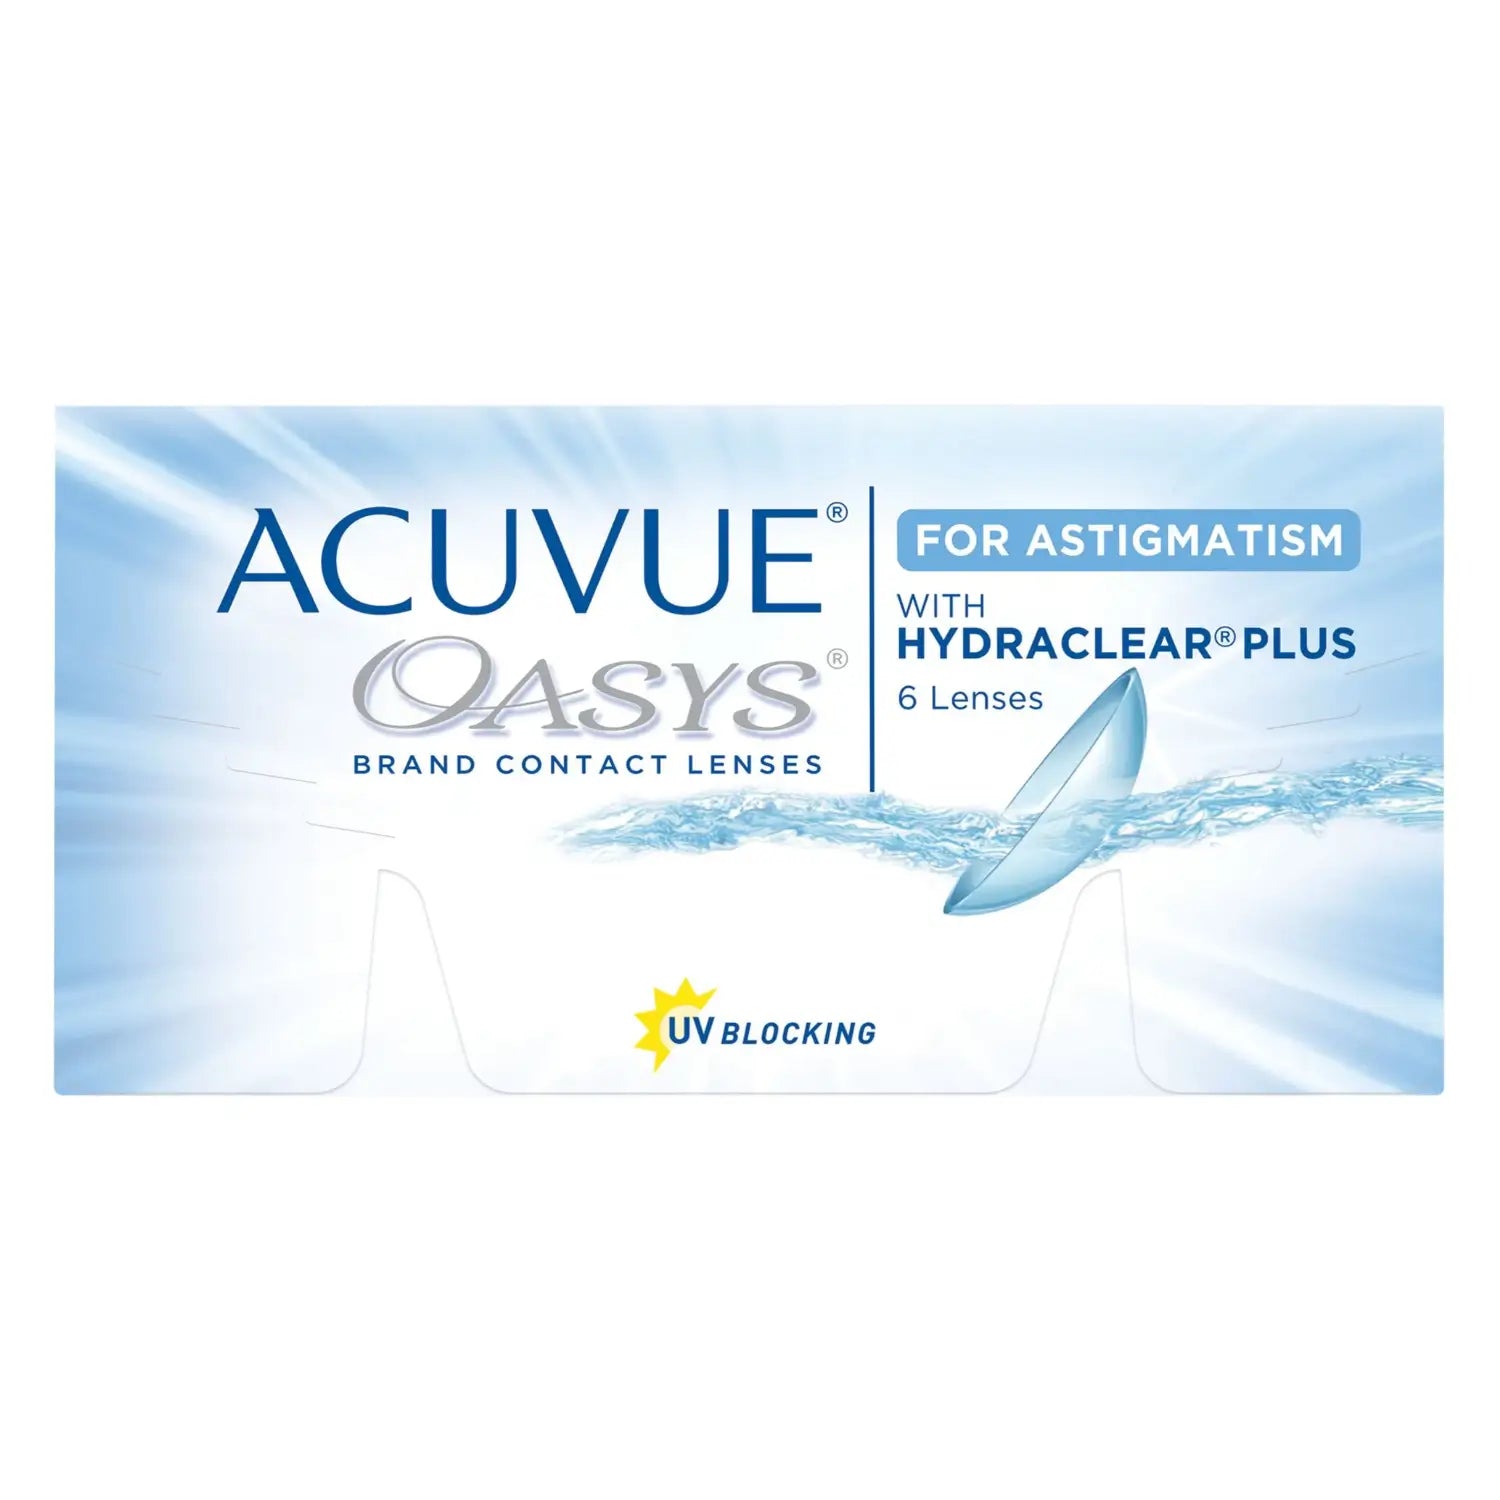 Acuvue Oasys certified contact lenses online at best price